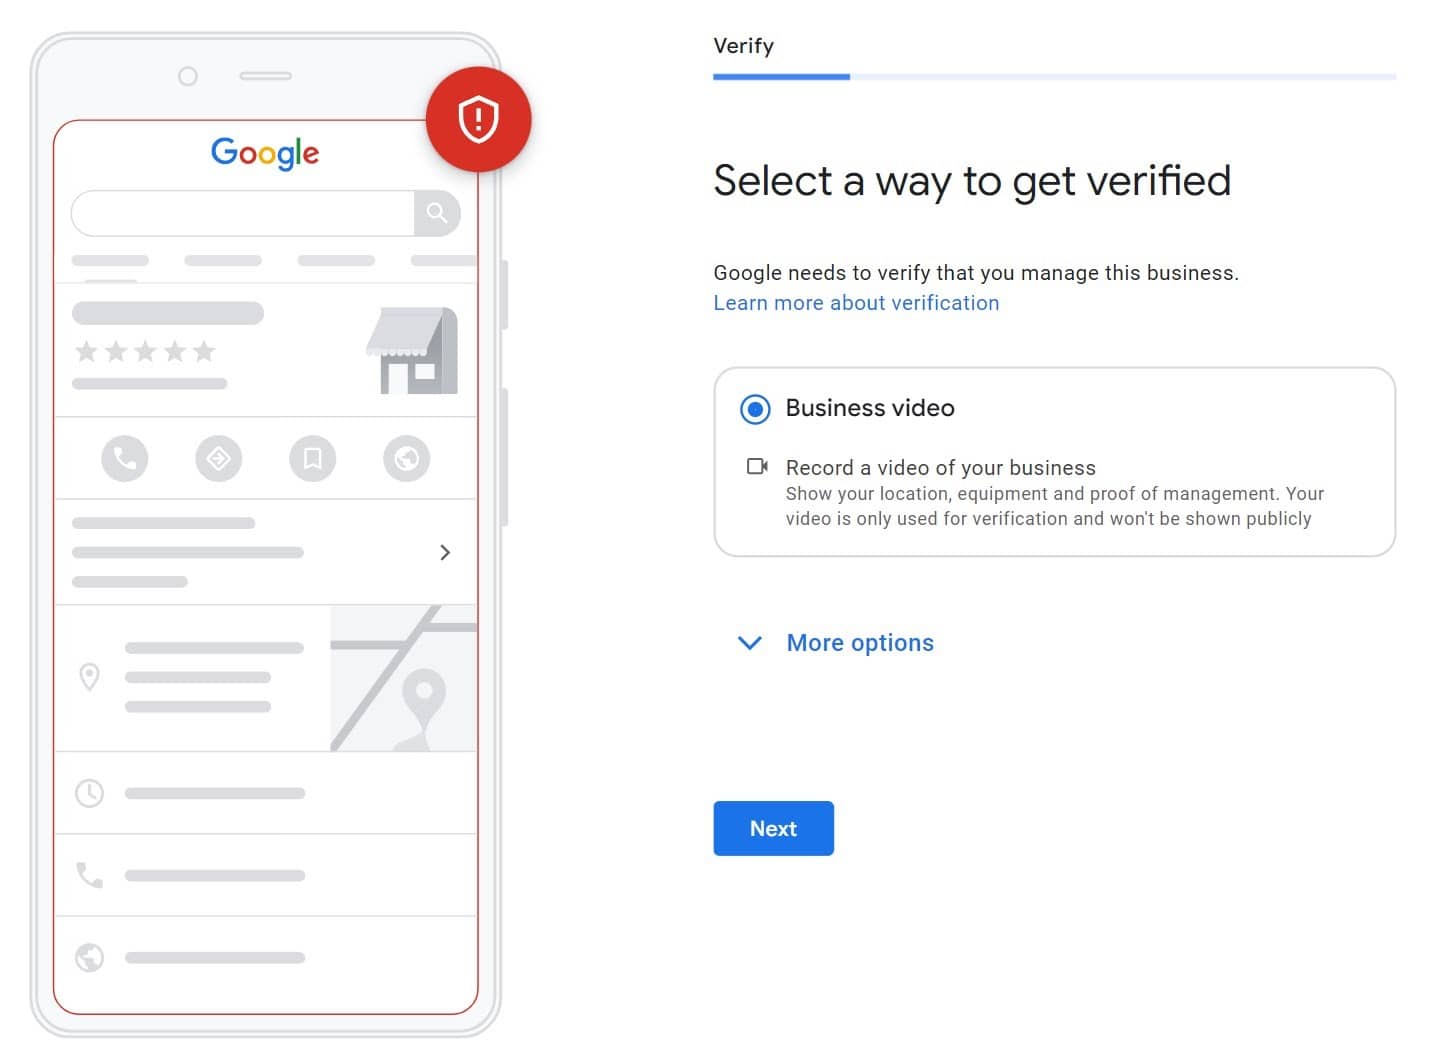 Google provides different ways to verify